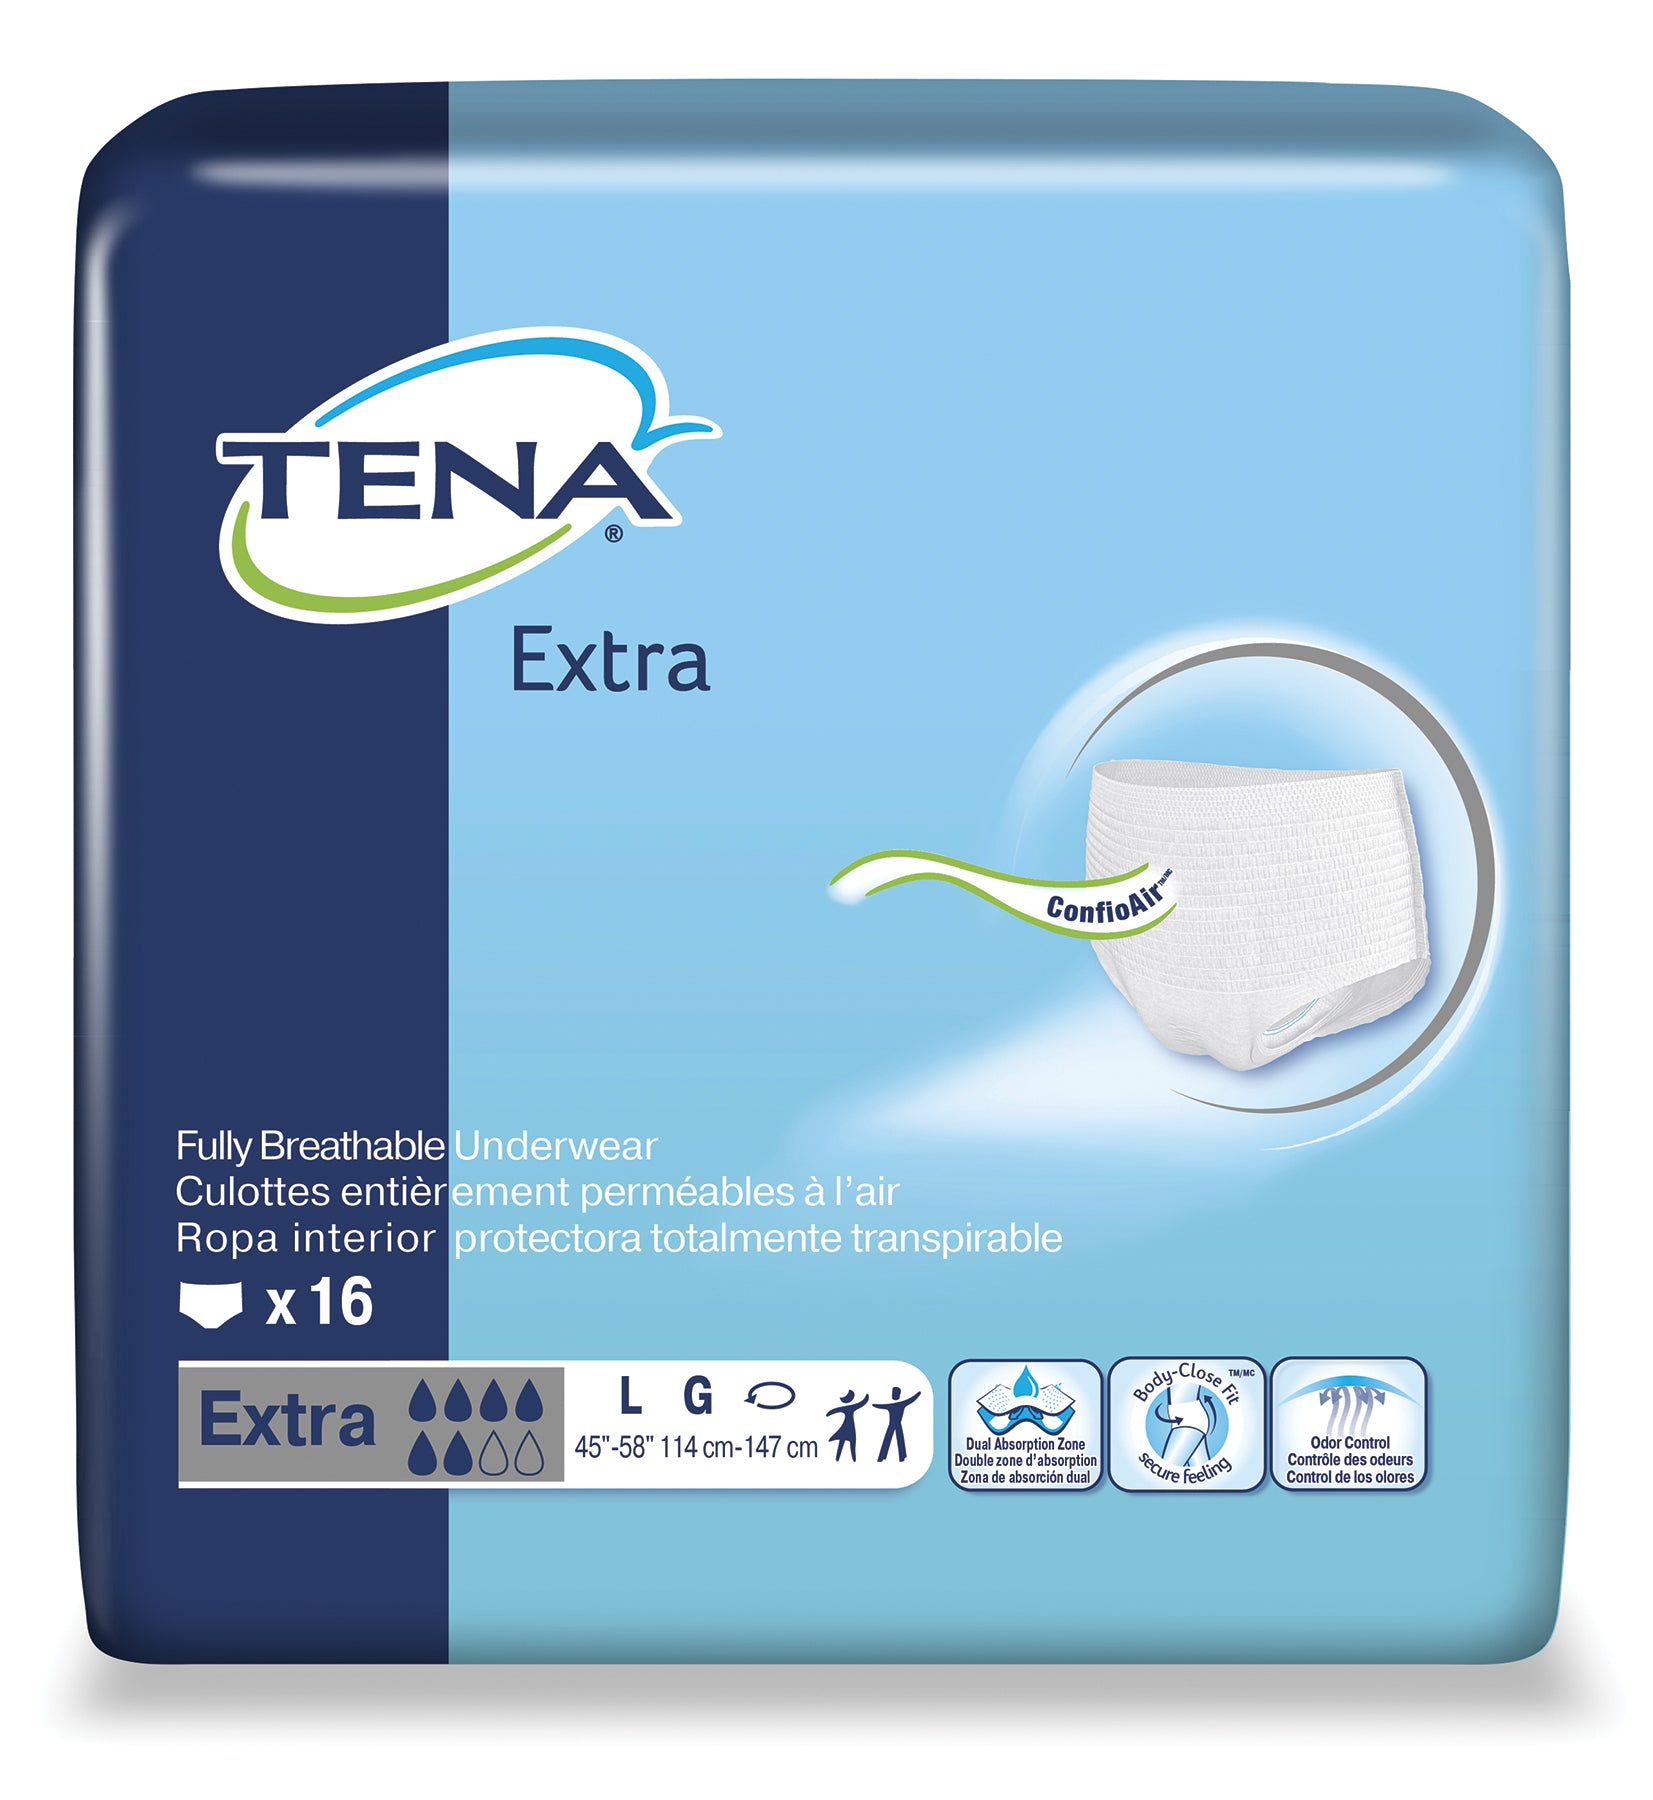 Tena Proskin Protective Incontinence Underwear For Men, Moderate